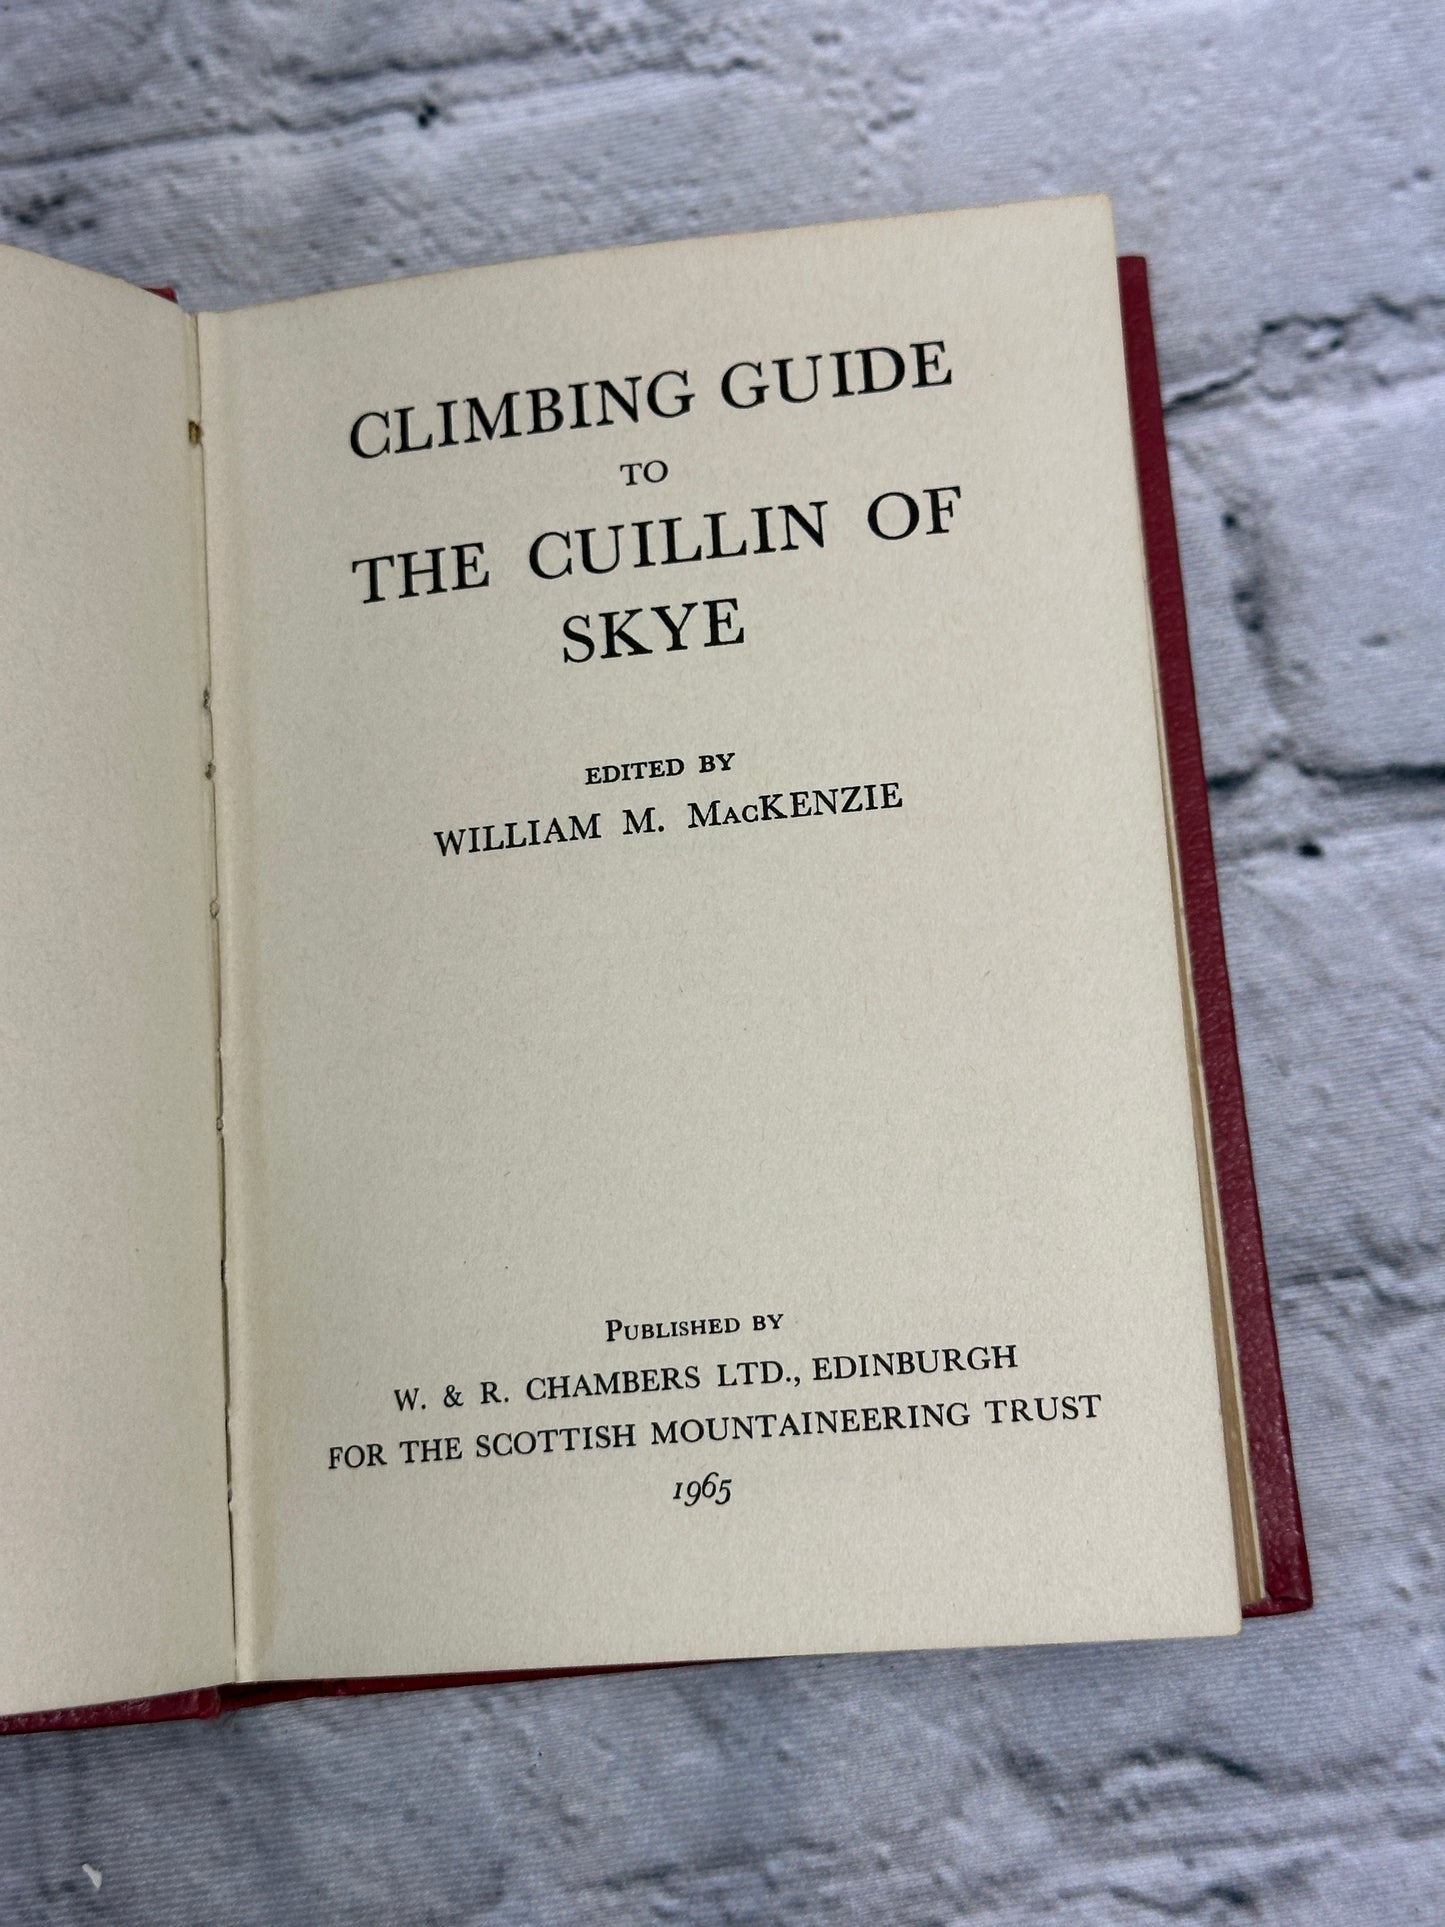 Climbers' Guide to the Cuillin of Skye by William MacKenzie [1965]